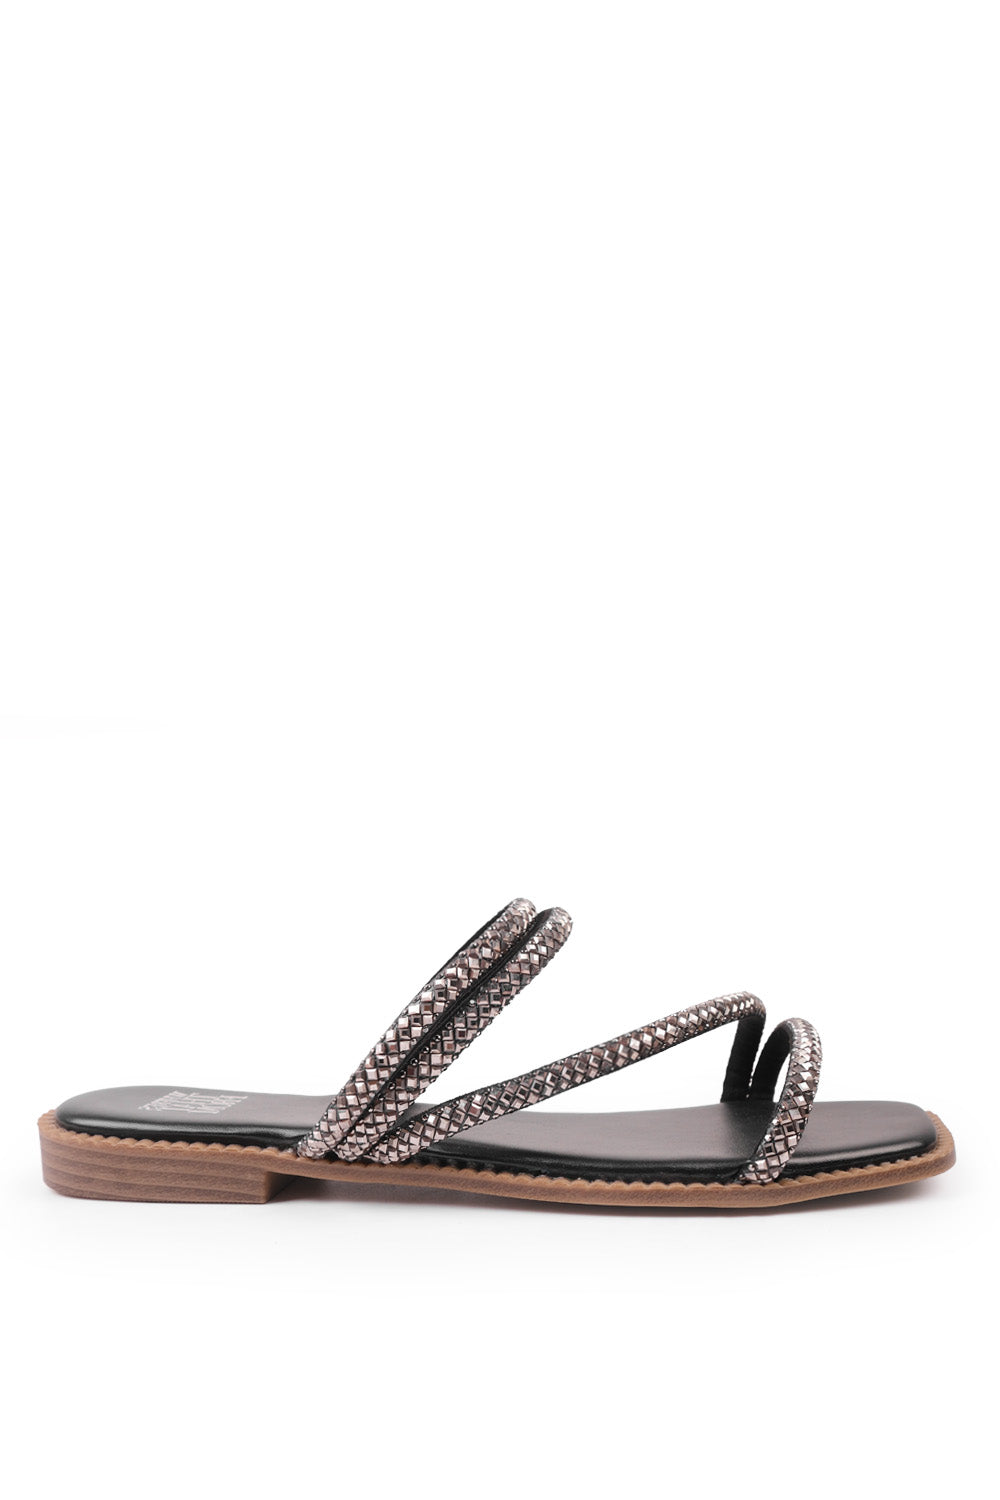 DREAM EXTRA WIDE STRAPPY FLAT SLIDER SANDALS WITH DIAMANTE DETAIL IN BLACK FAUX LEATHER